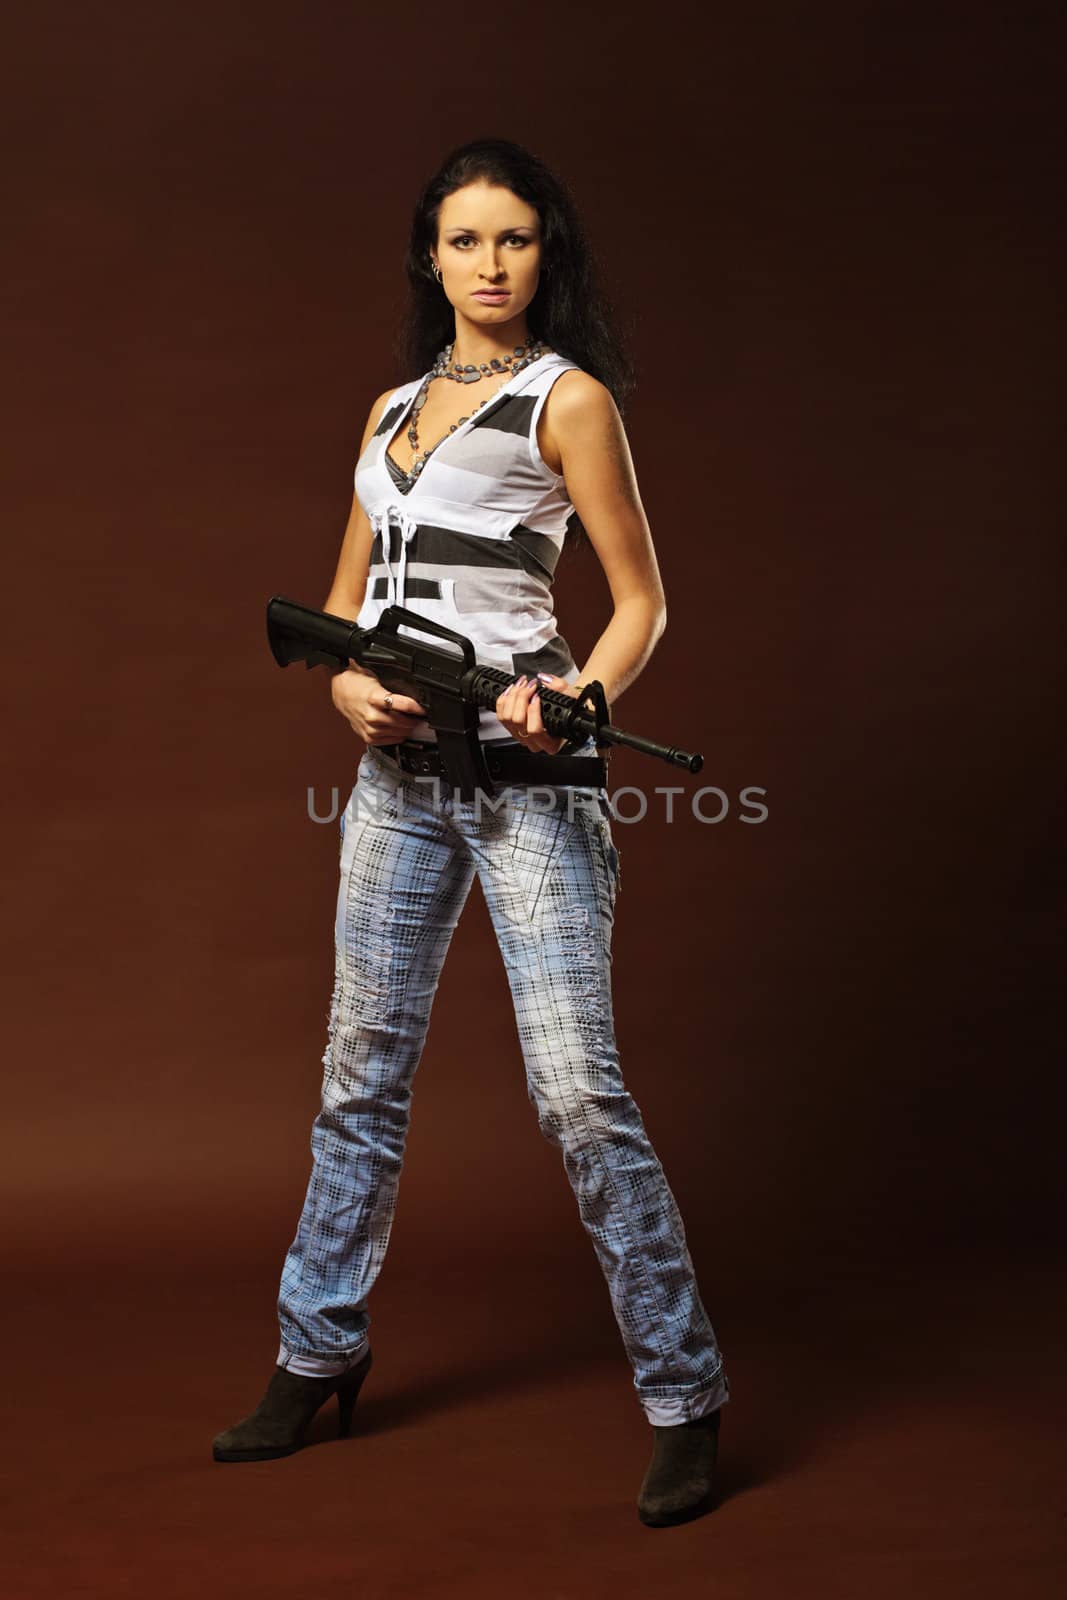 Beautiful woman with a rifle by pzaxe